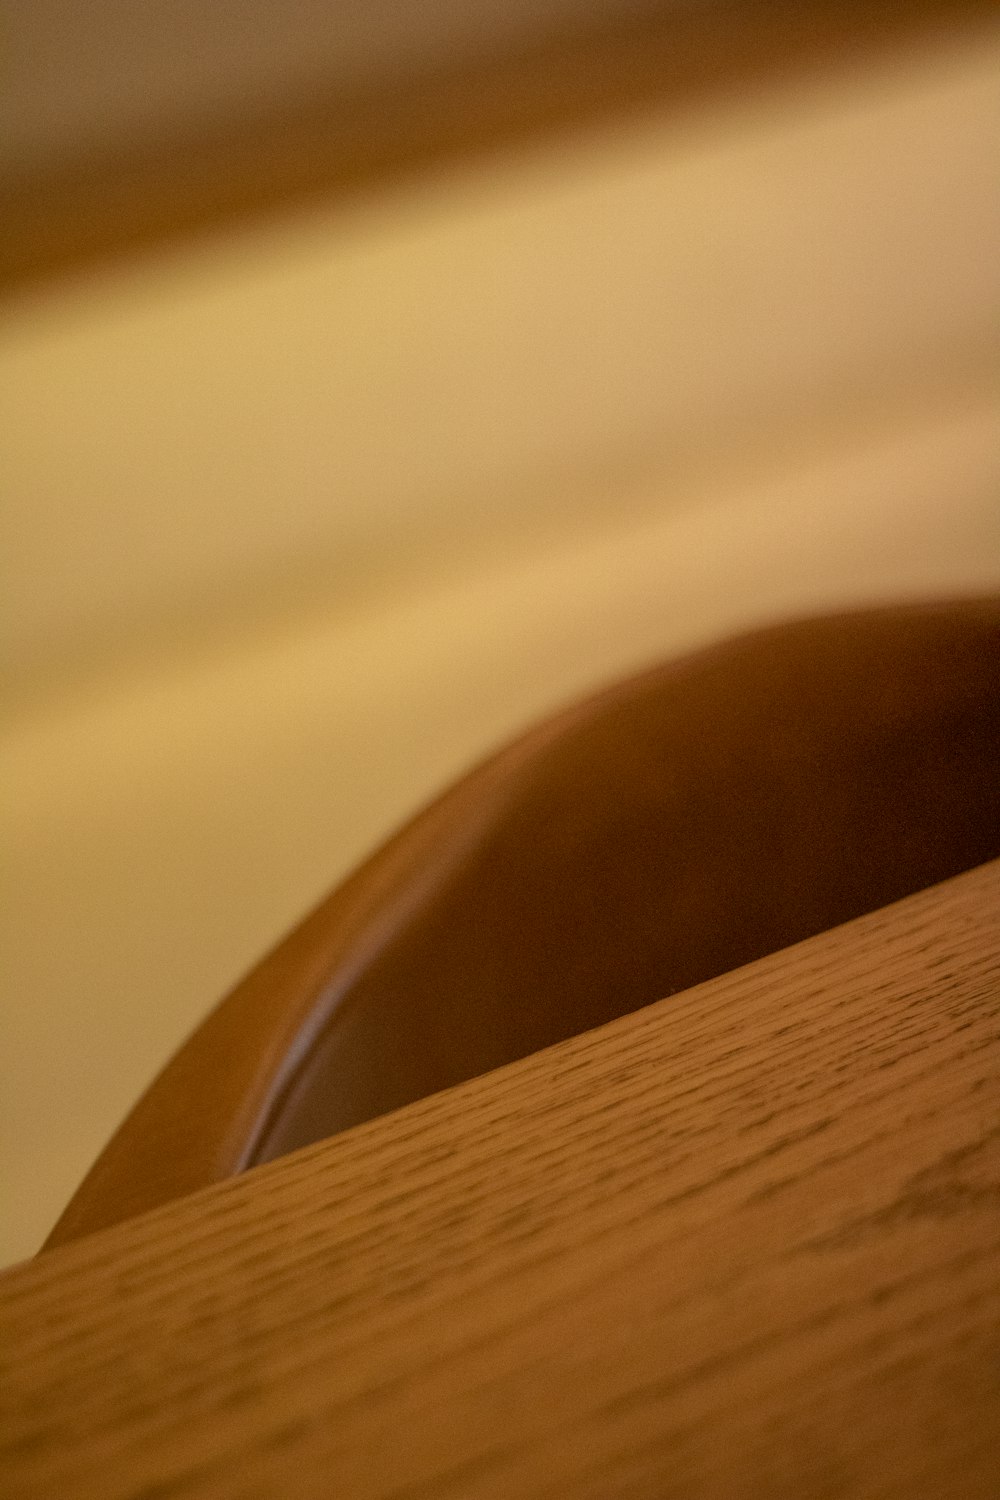 a close up of a wooden table with a blurry background